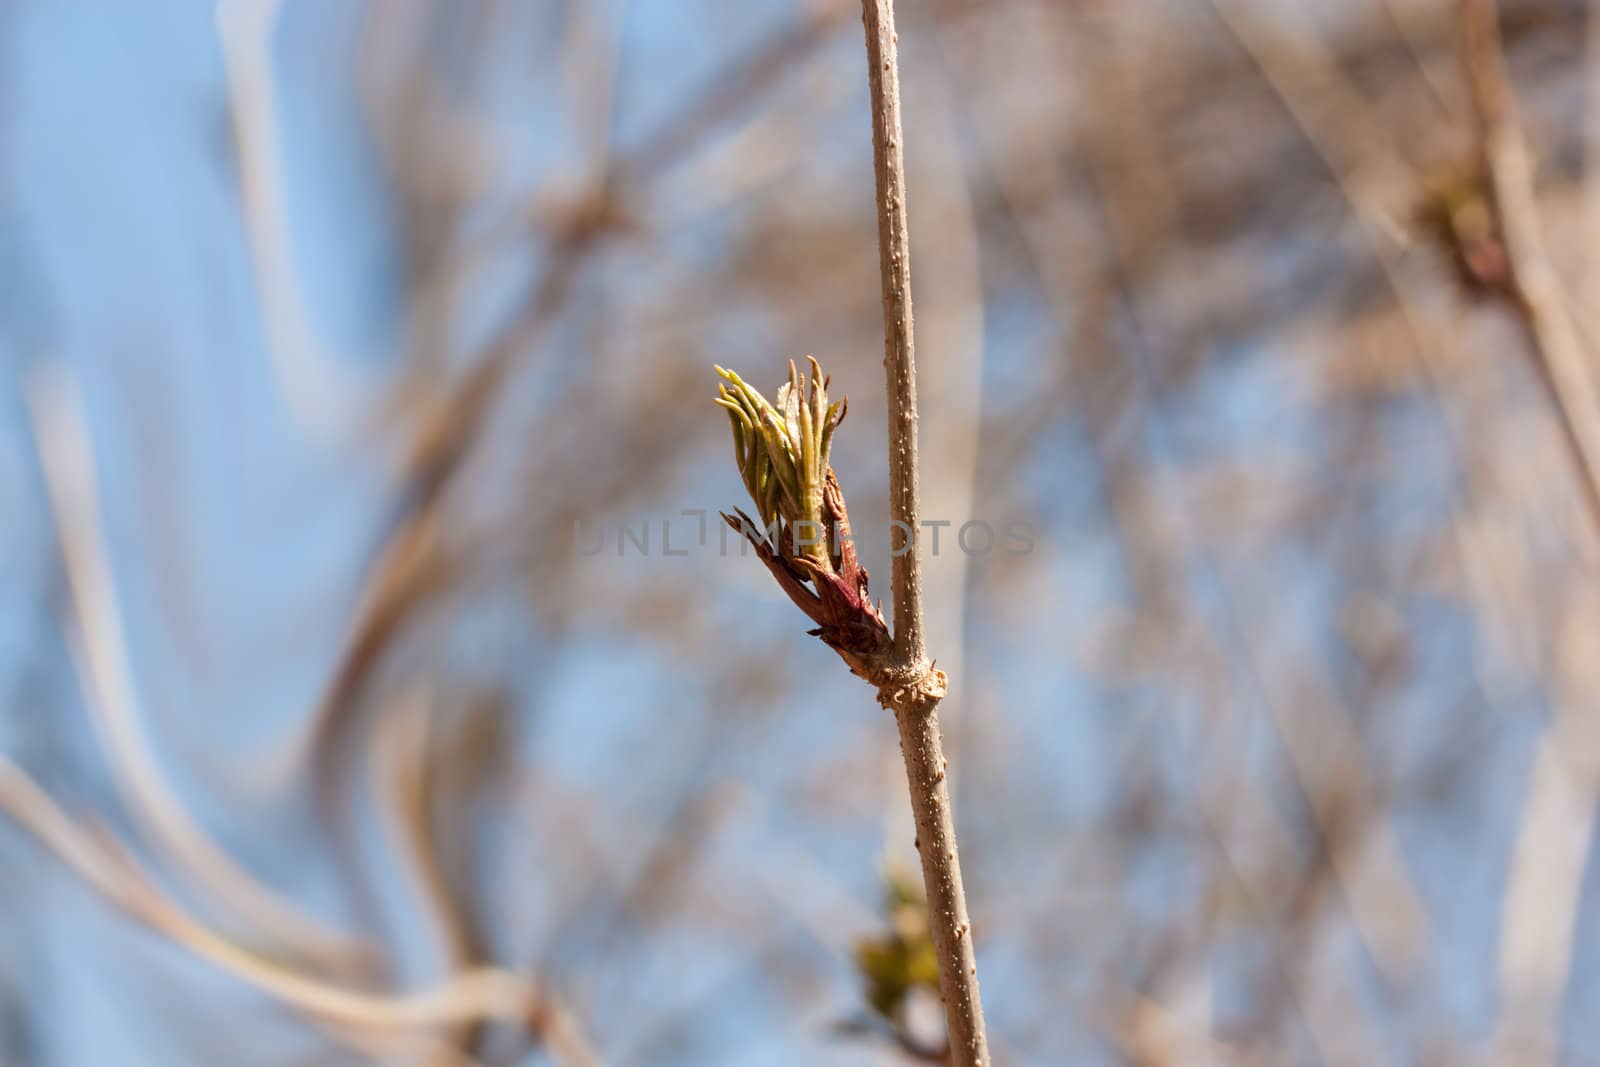 the opened buds on the trees by schankz